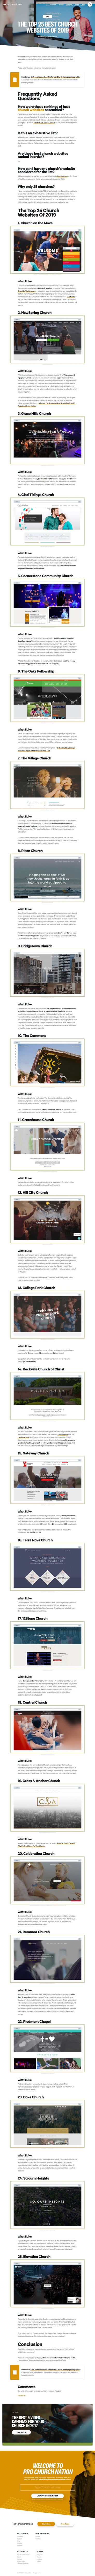 77 Of The Best Church Websites Of 2016 – Pro Church Tools